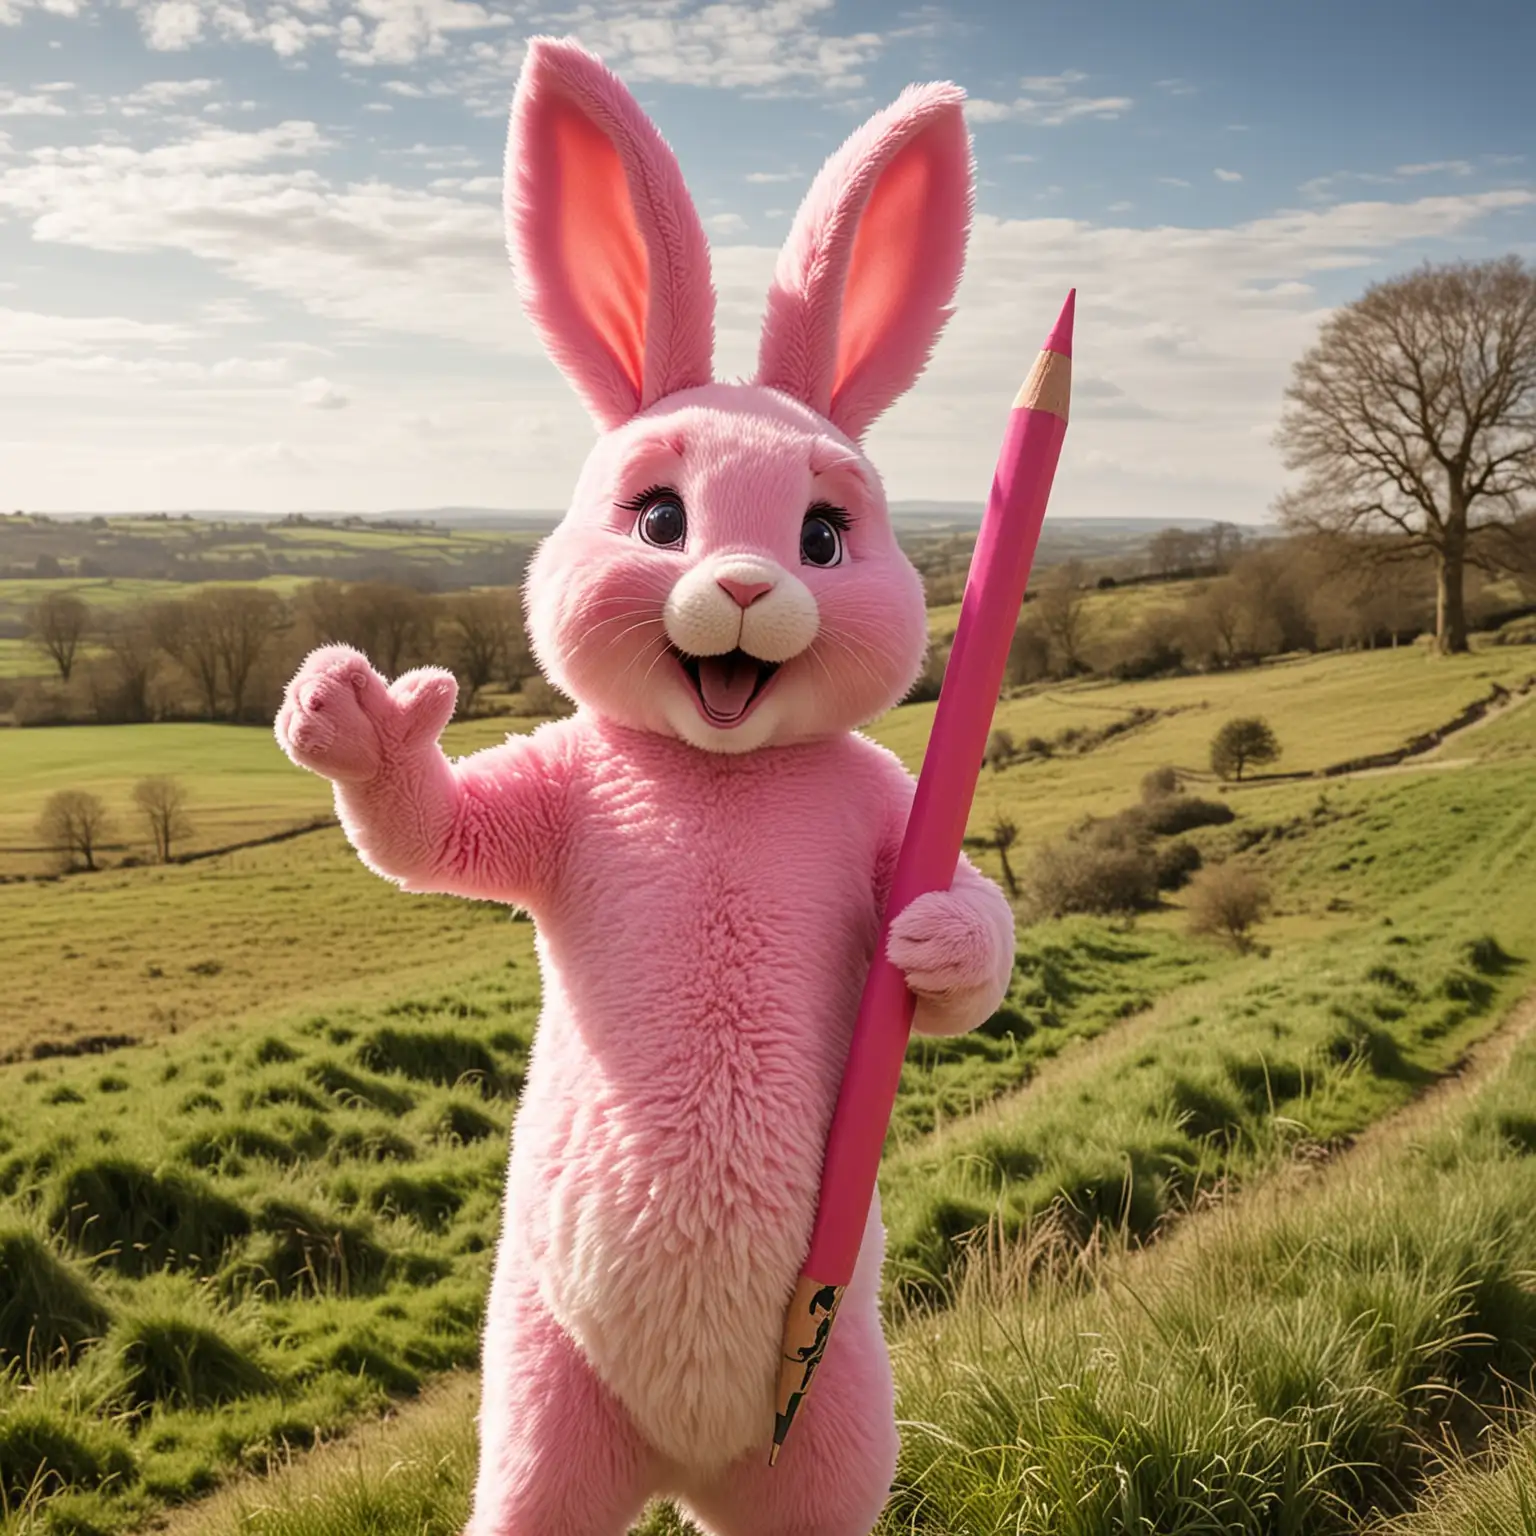 Excited Pink Easter Bunny Drawing with Giant Pencil in the English Countryside